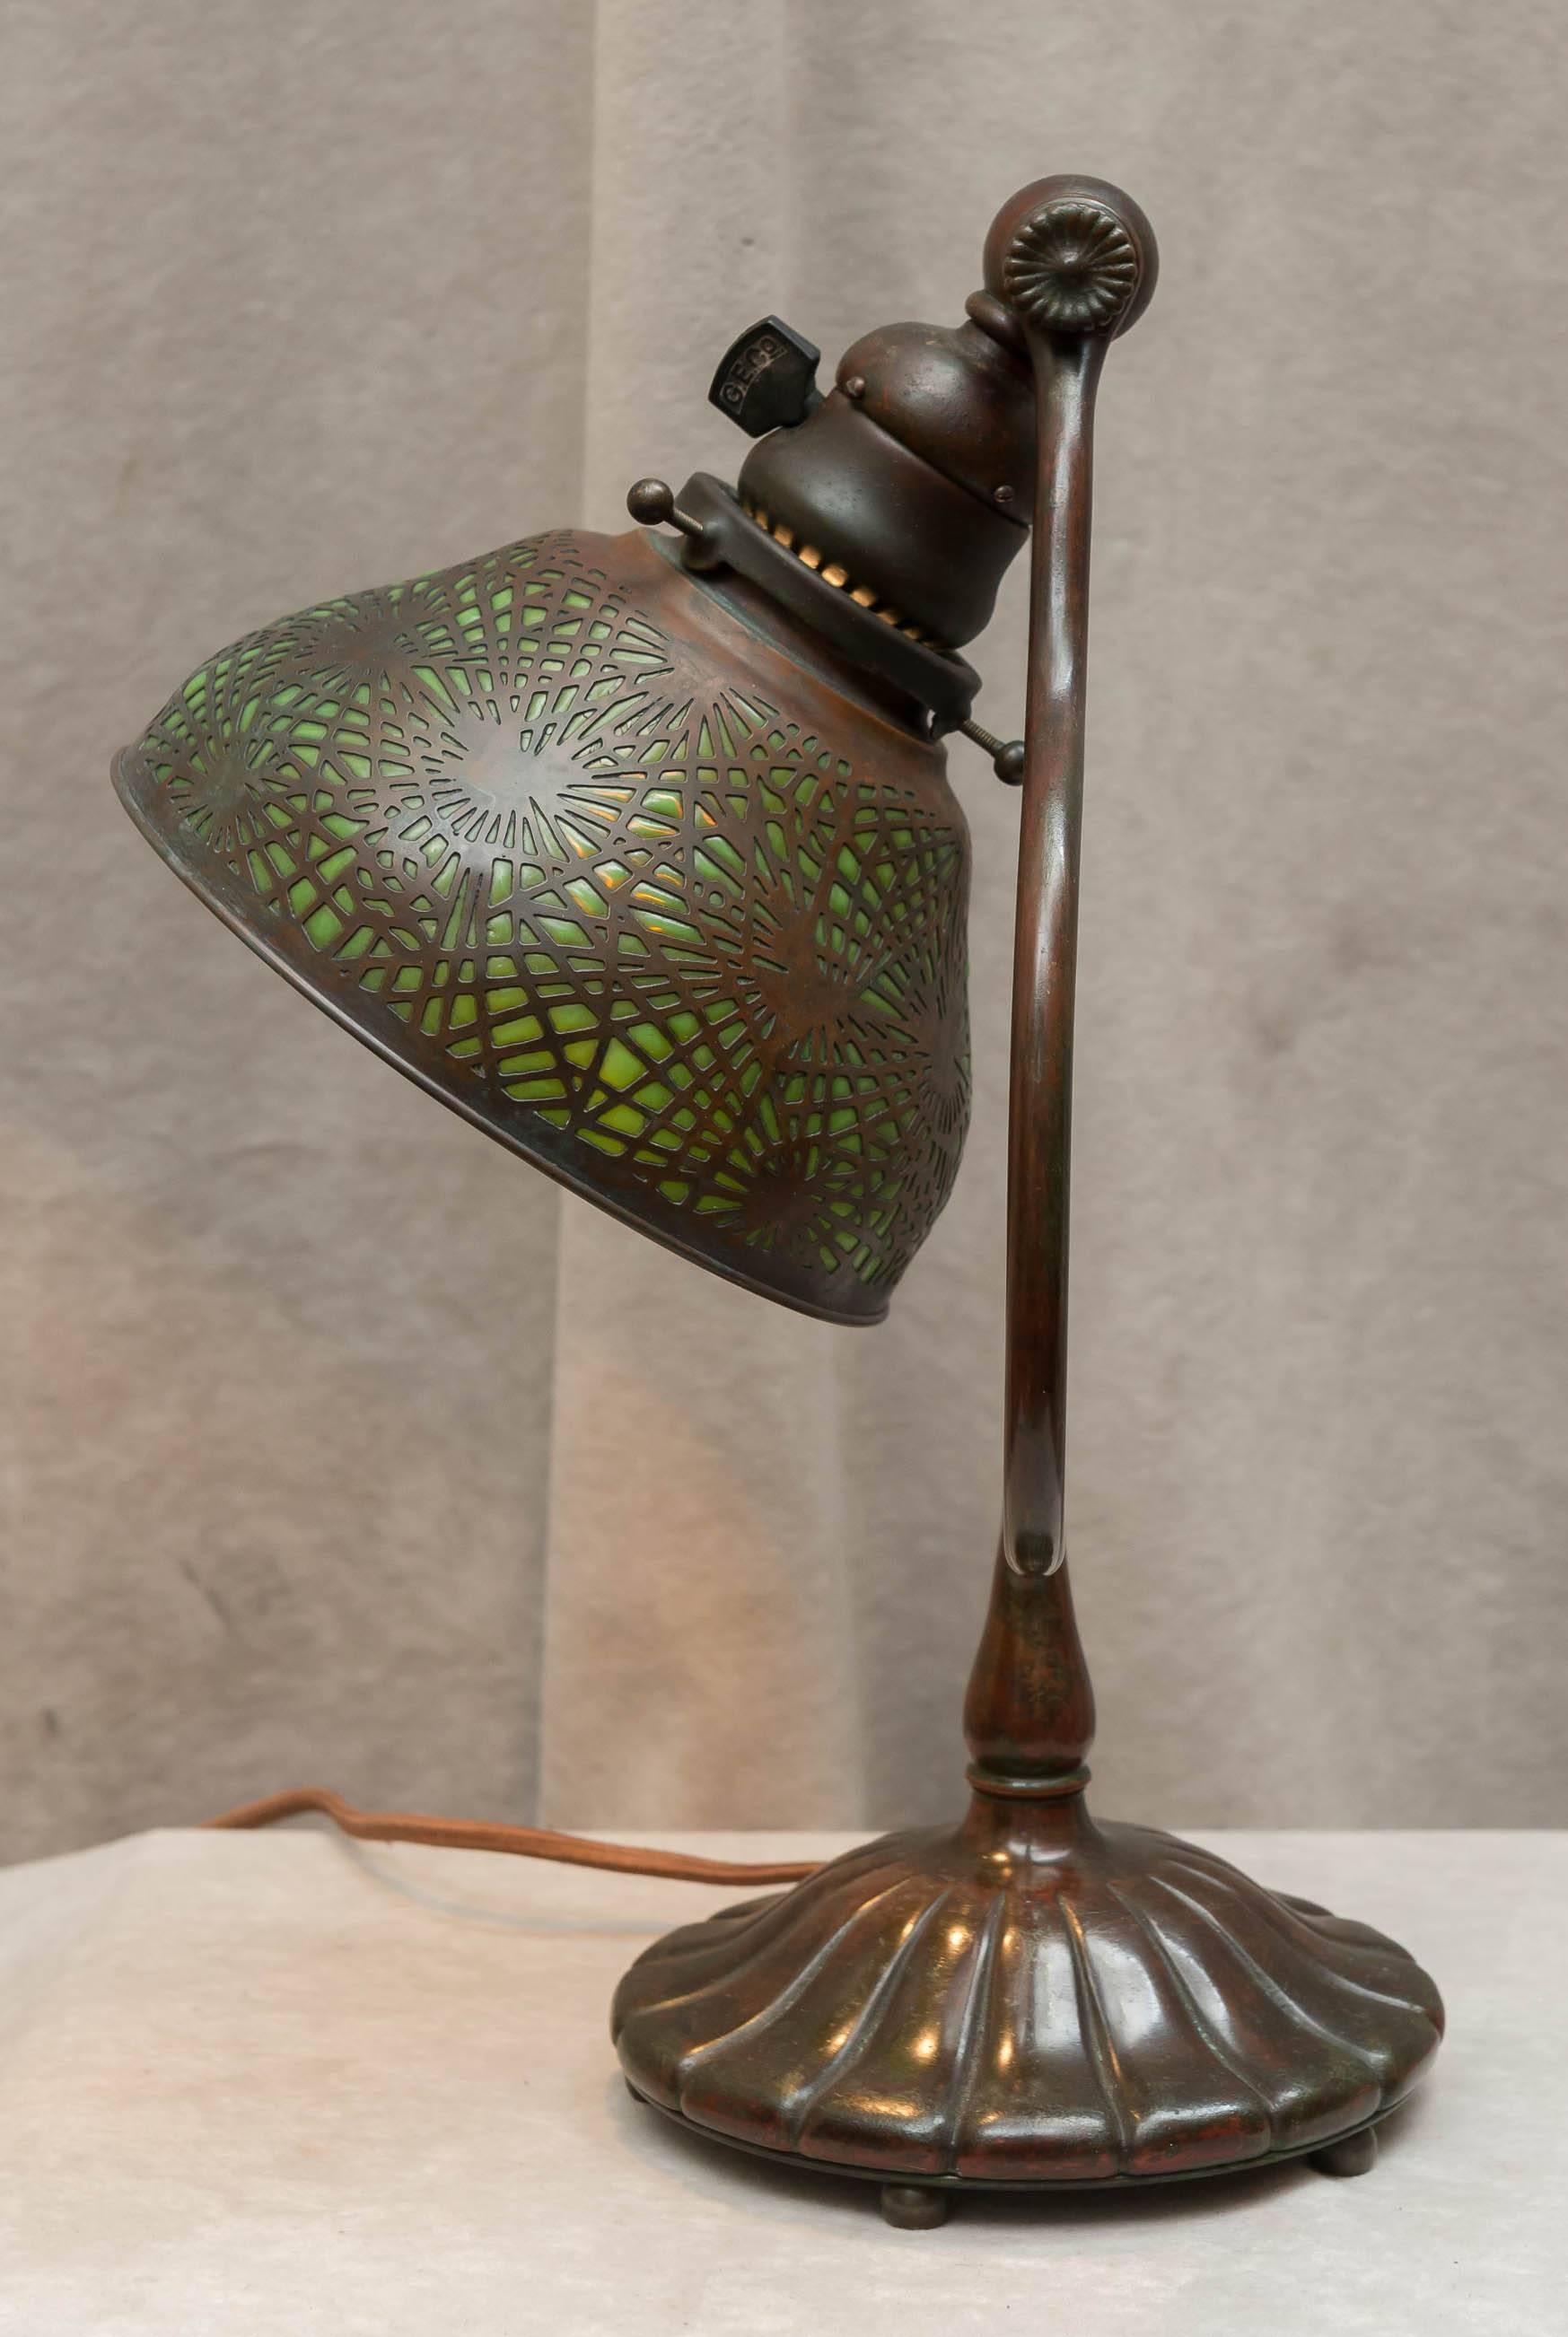 Hand-Crafted Tiffany Studios Harp Lamp with Pine Needle Shade